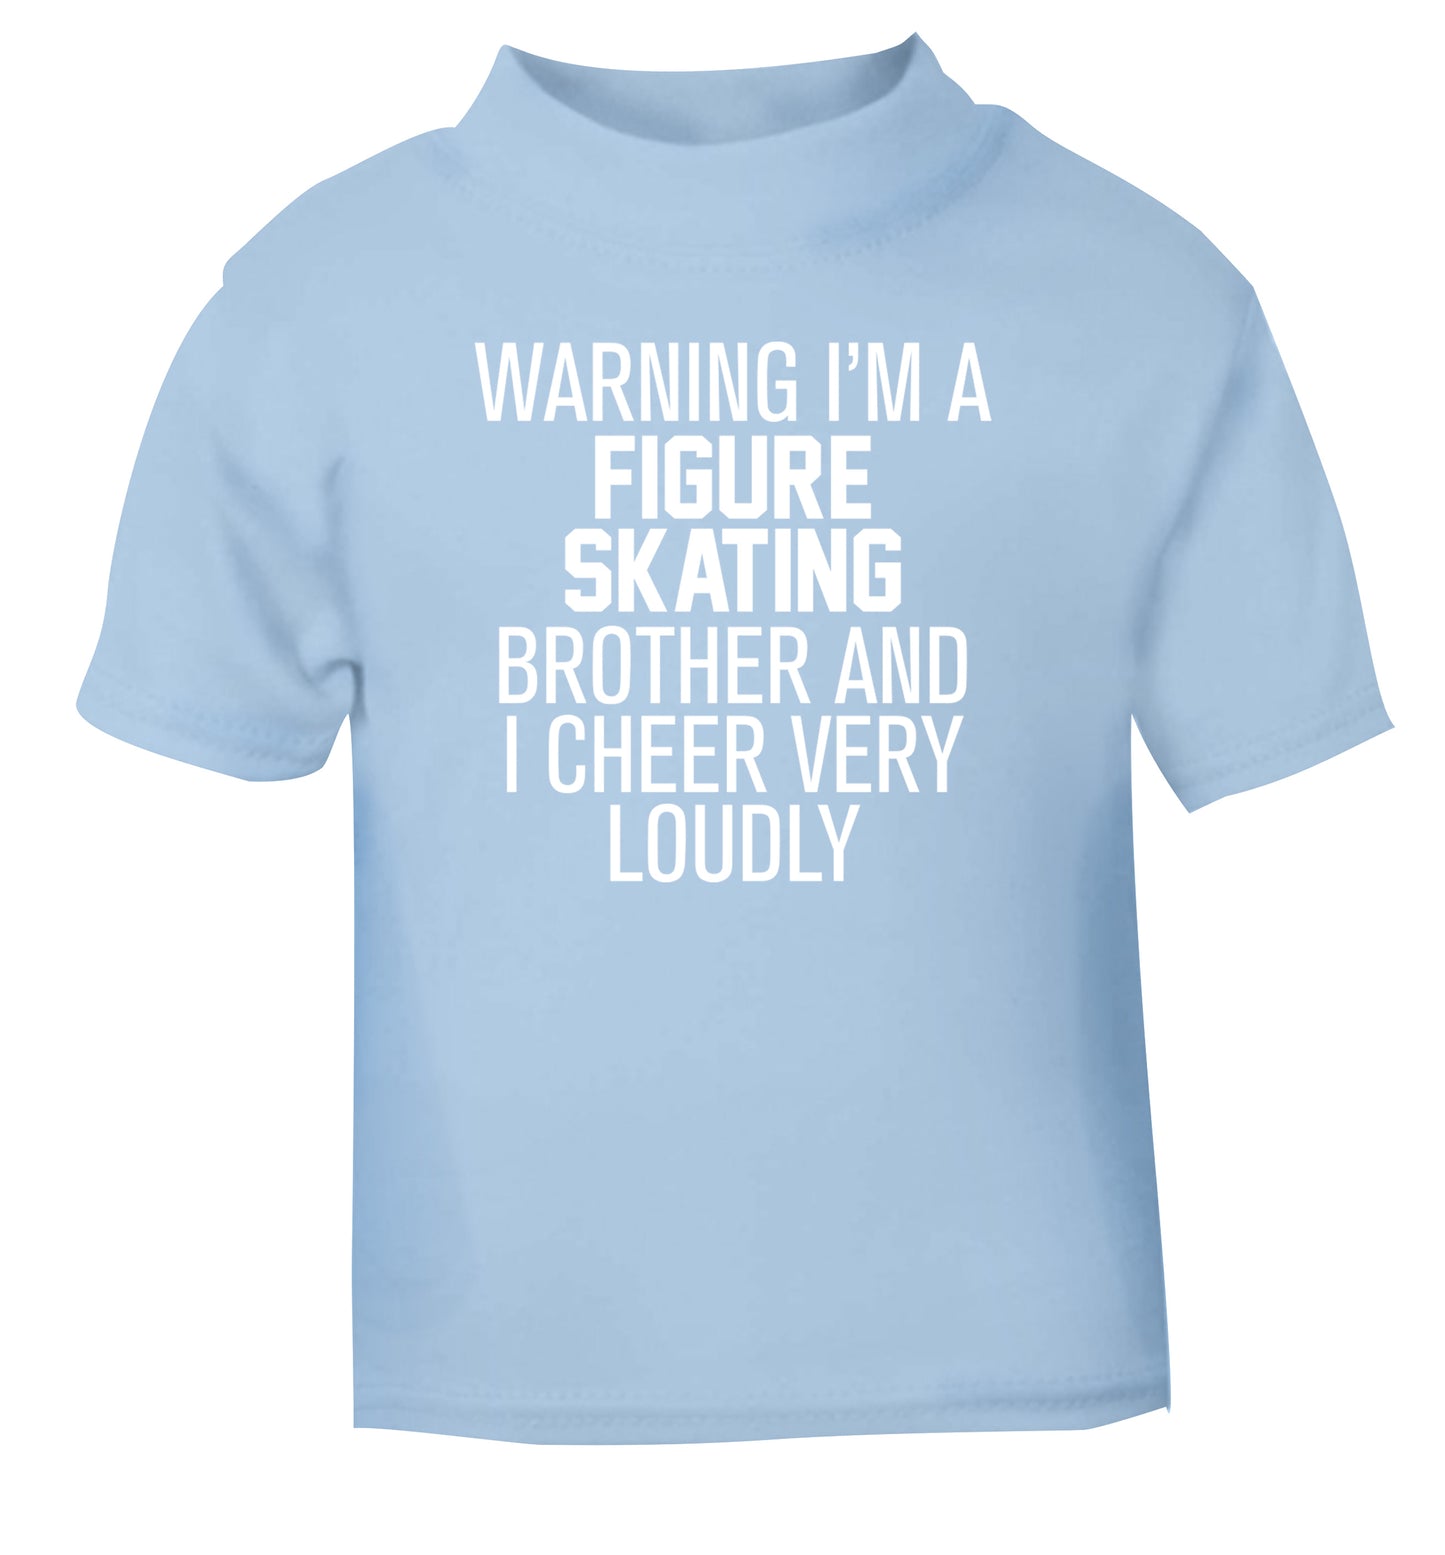 Warning I'm a figure skating brother and I cheer very loudly light blue Baby Toddler Tshirt 2 Years